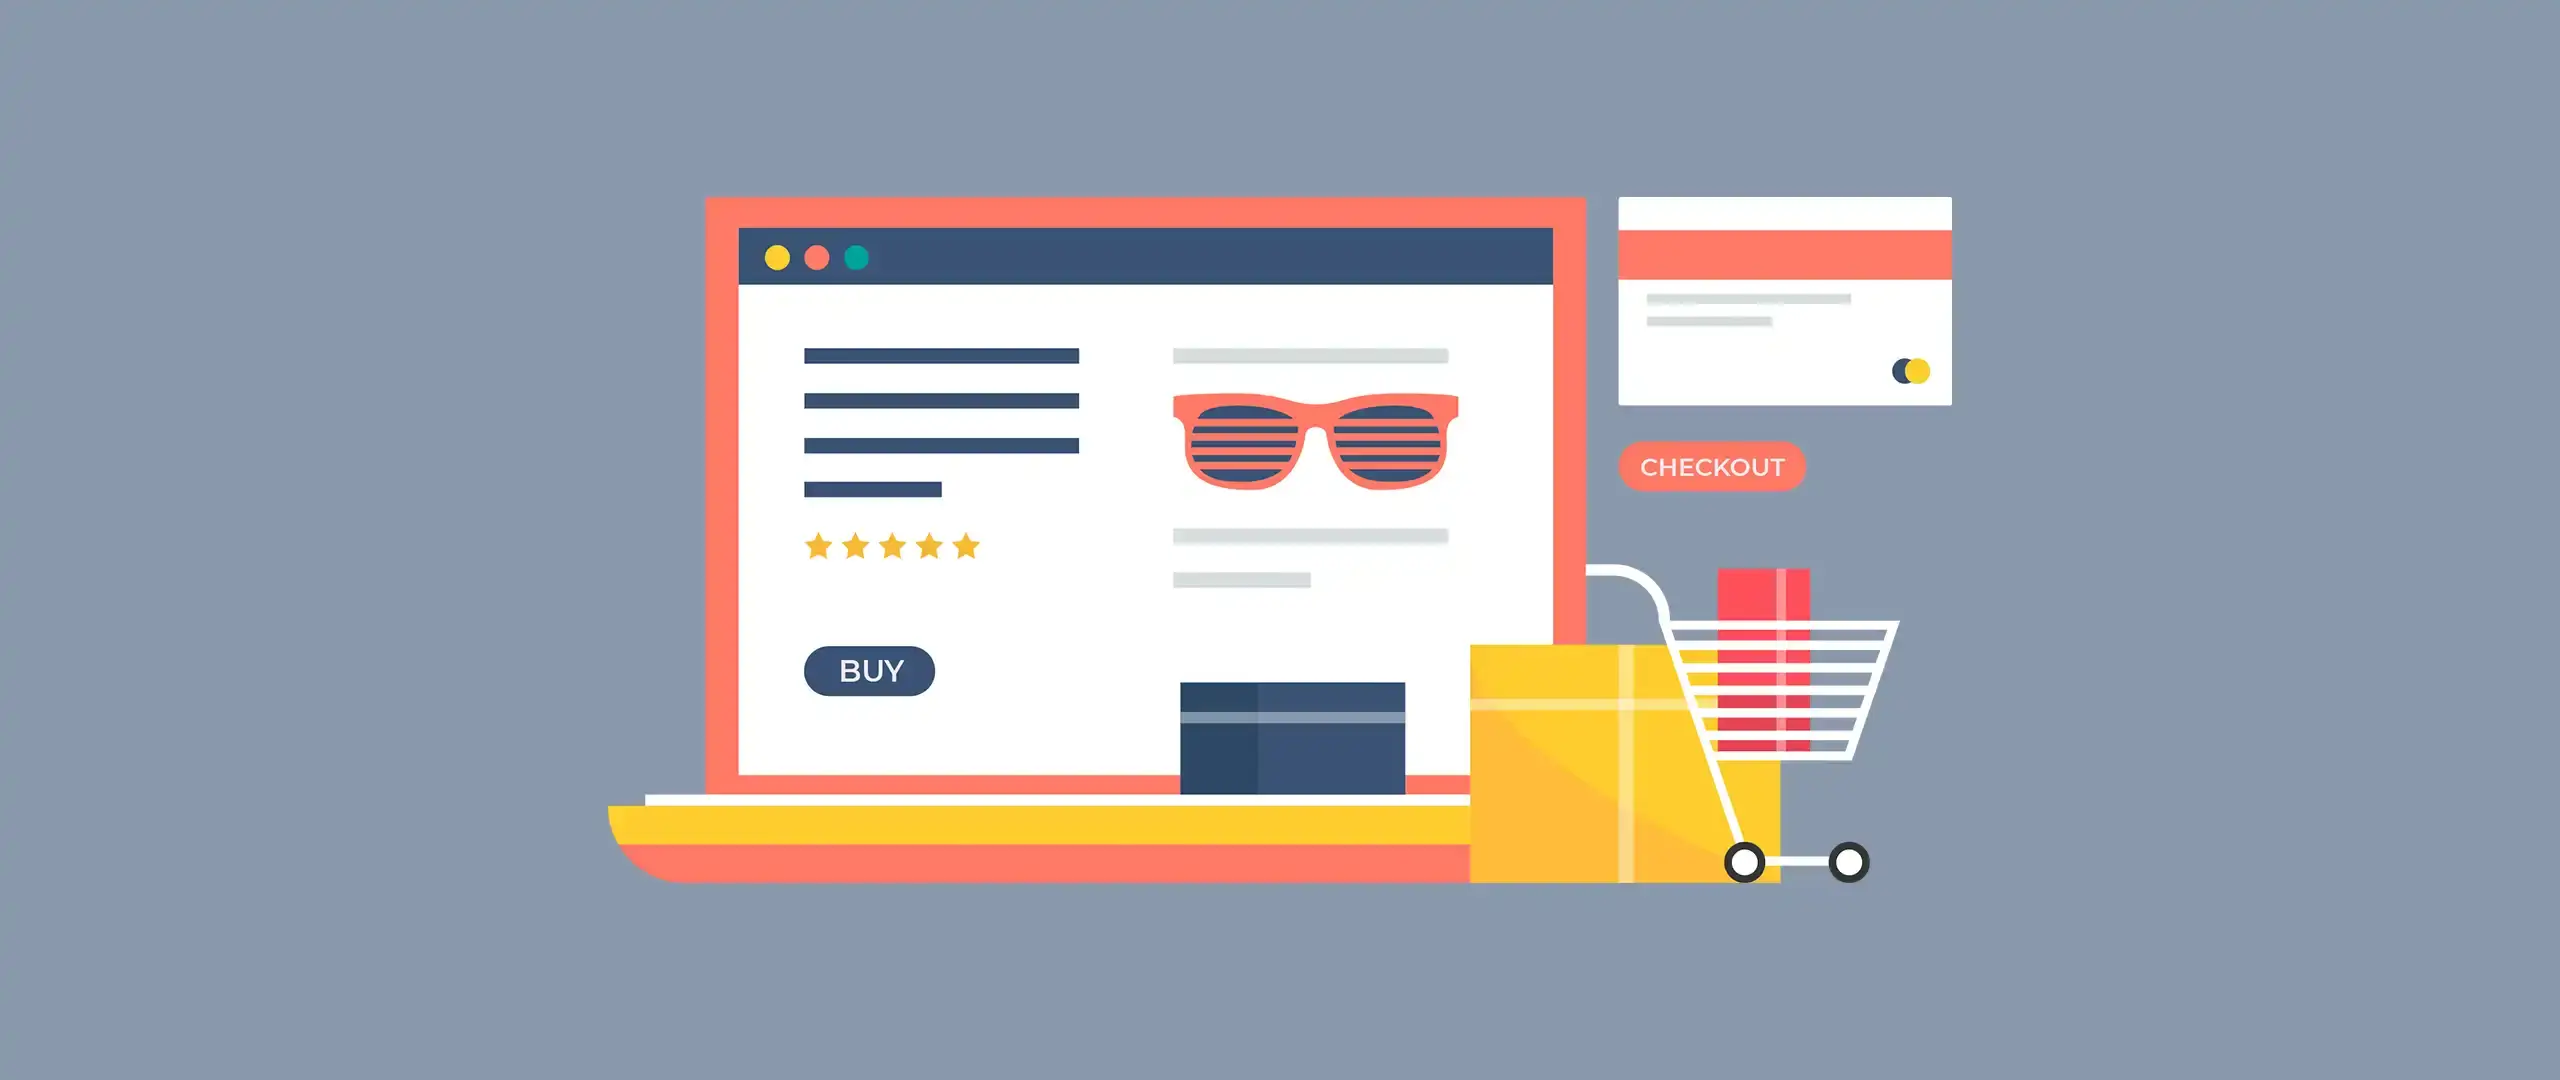 4 Of The Best eCommerce Product Pages